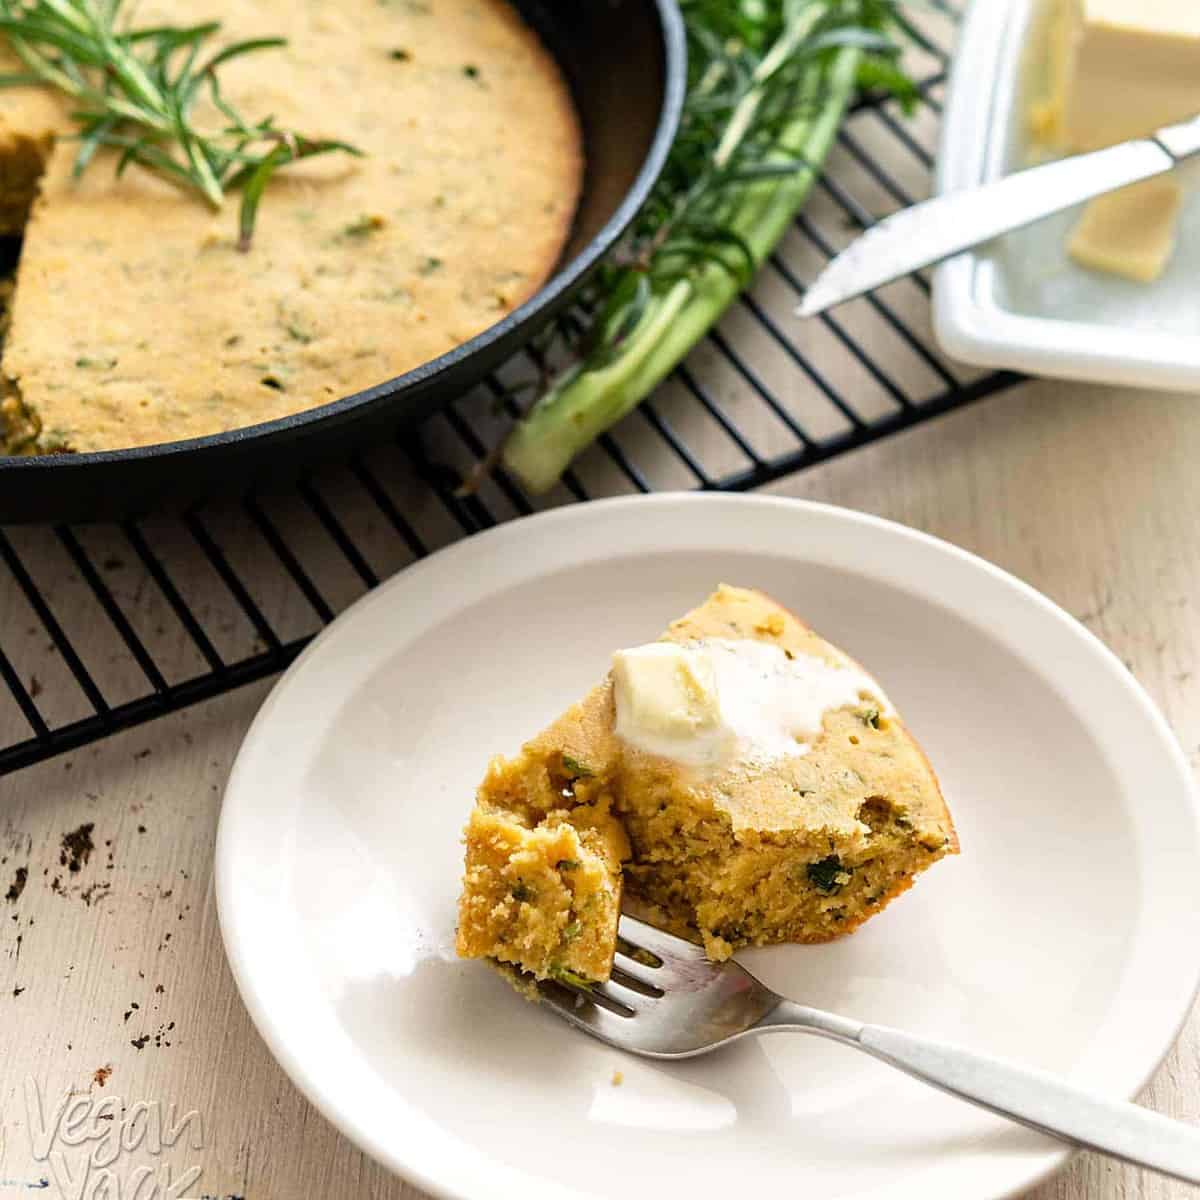  This moist and delicious cornbread is a great way to sneak in some veggies.